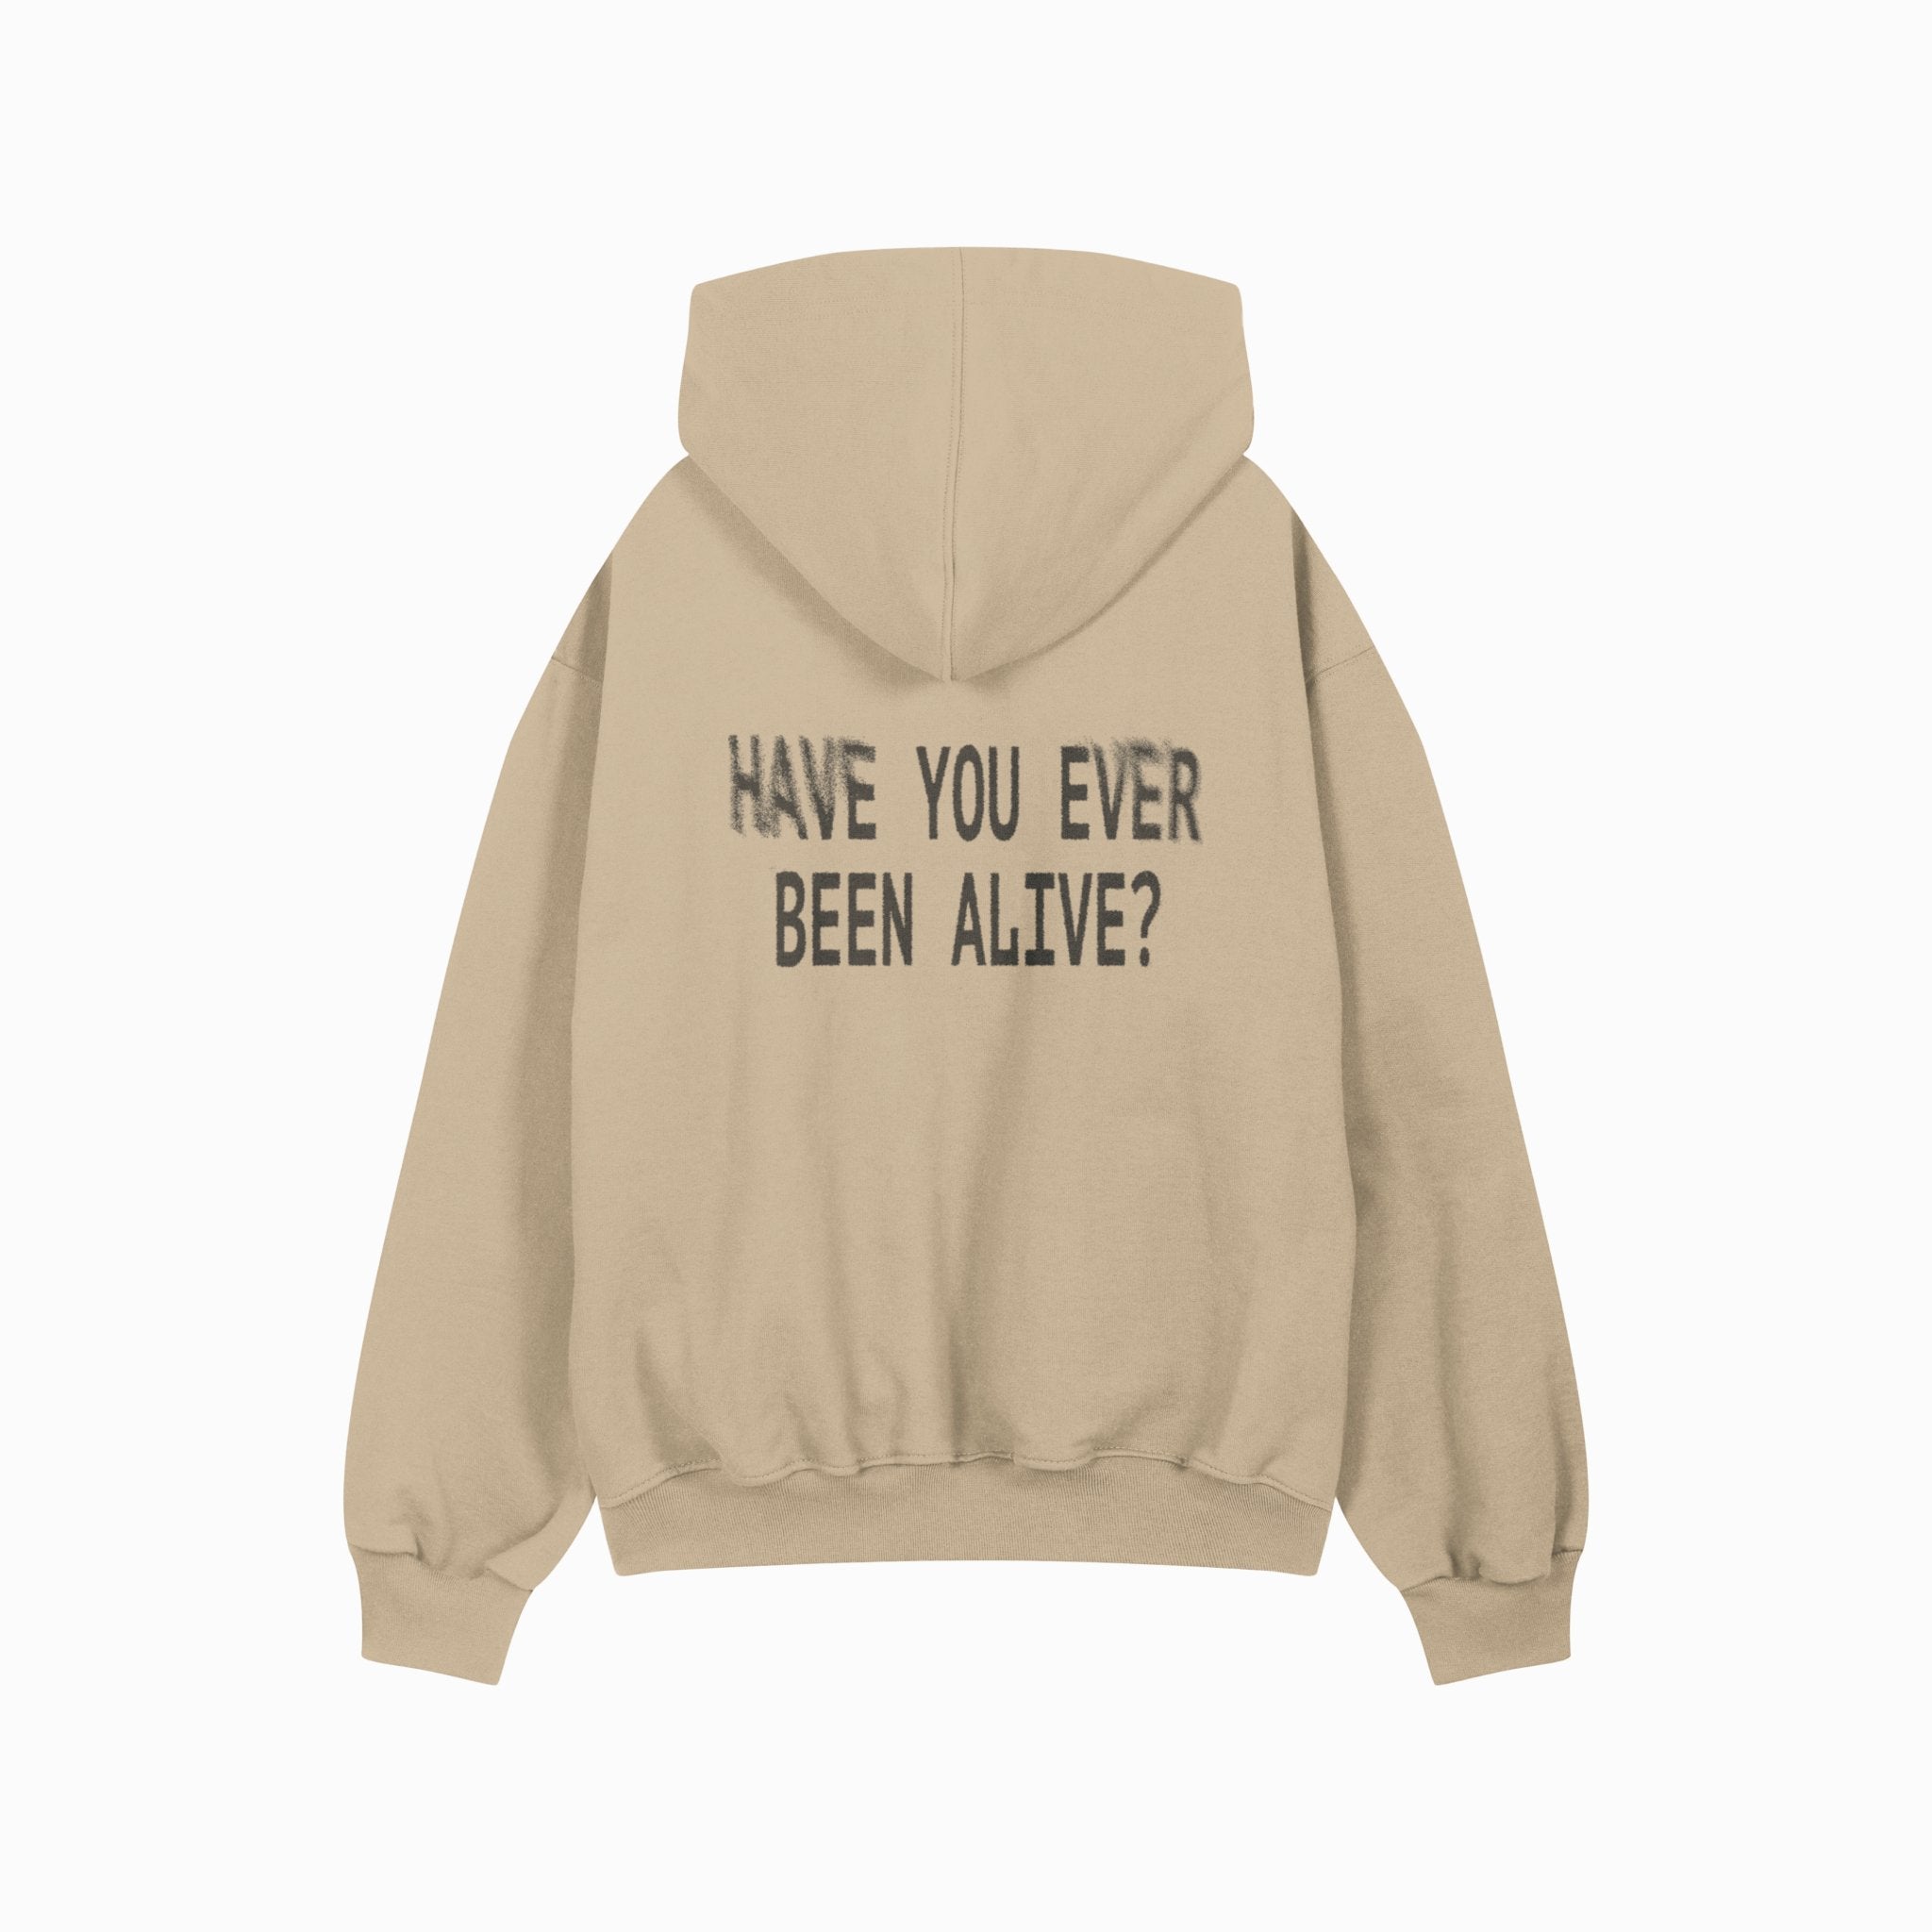 BLUZA HAVE YOU EVER BEEN ALIVE SAND - Nous Tous